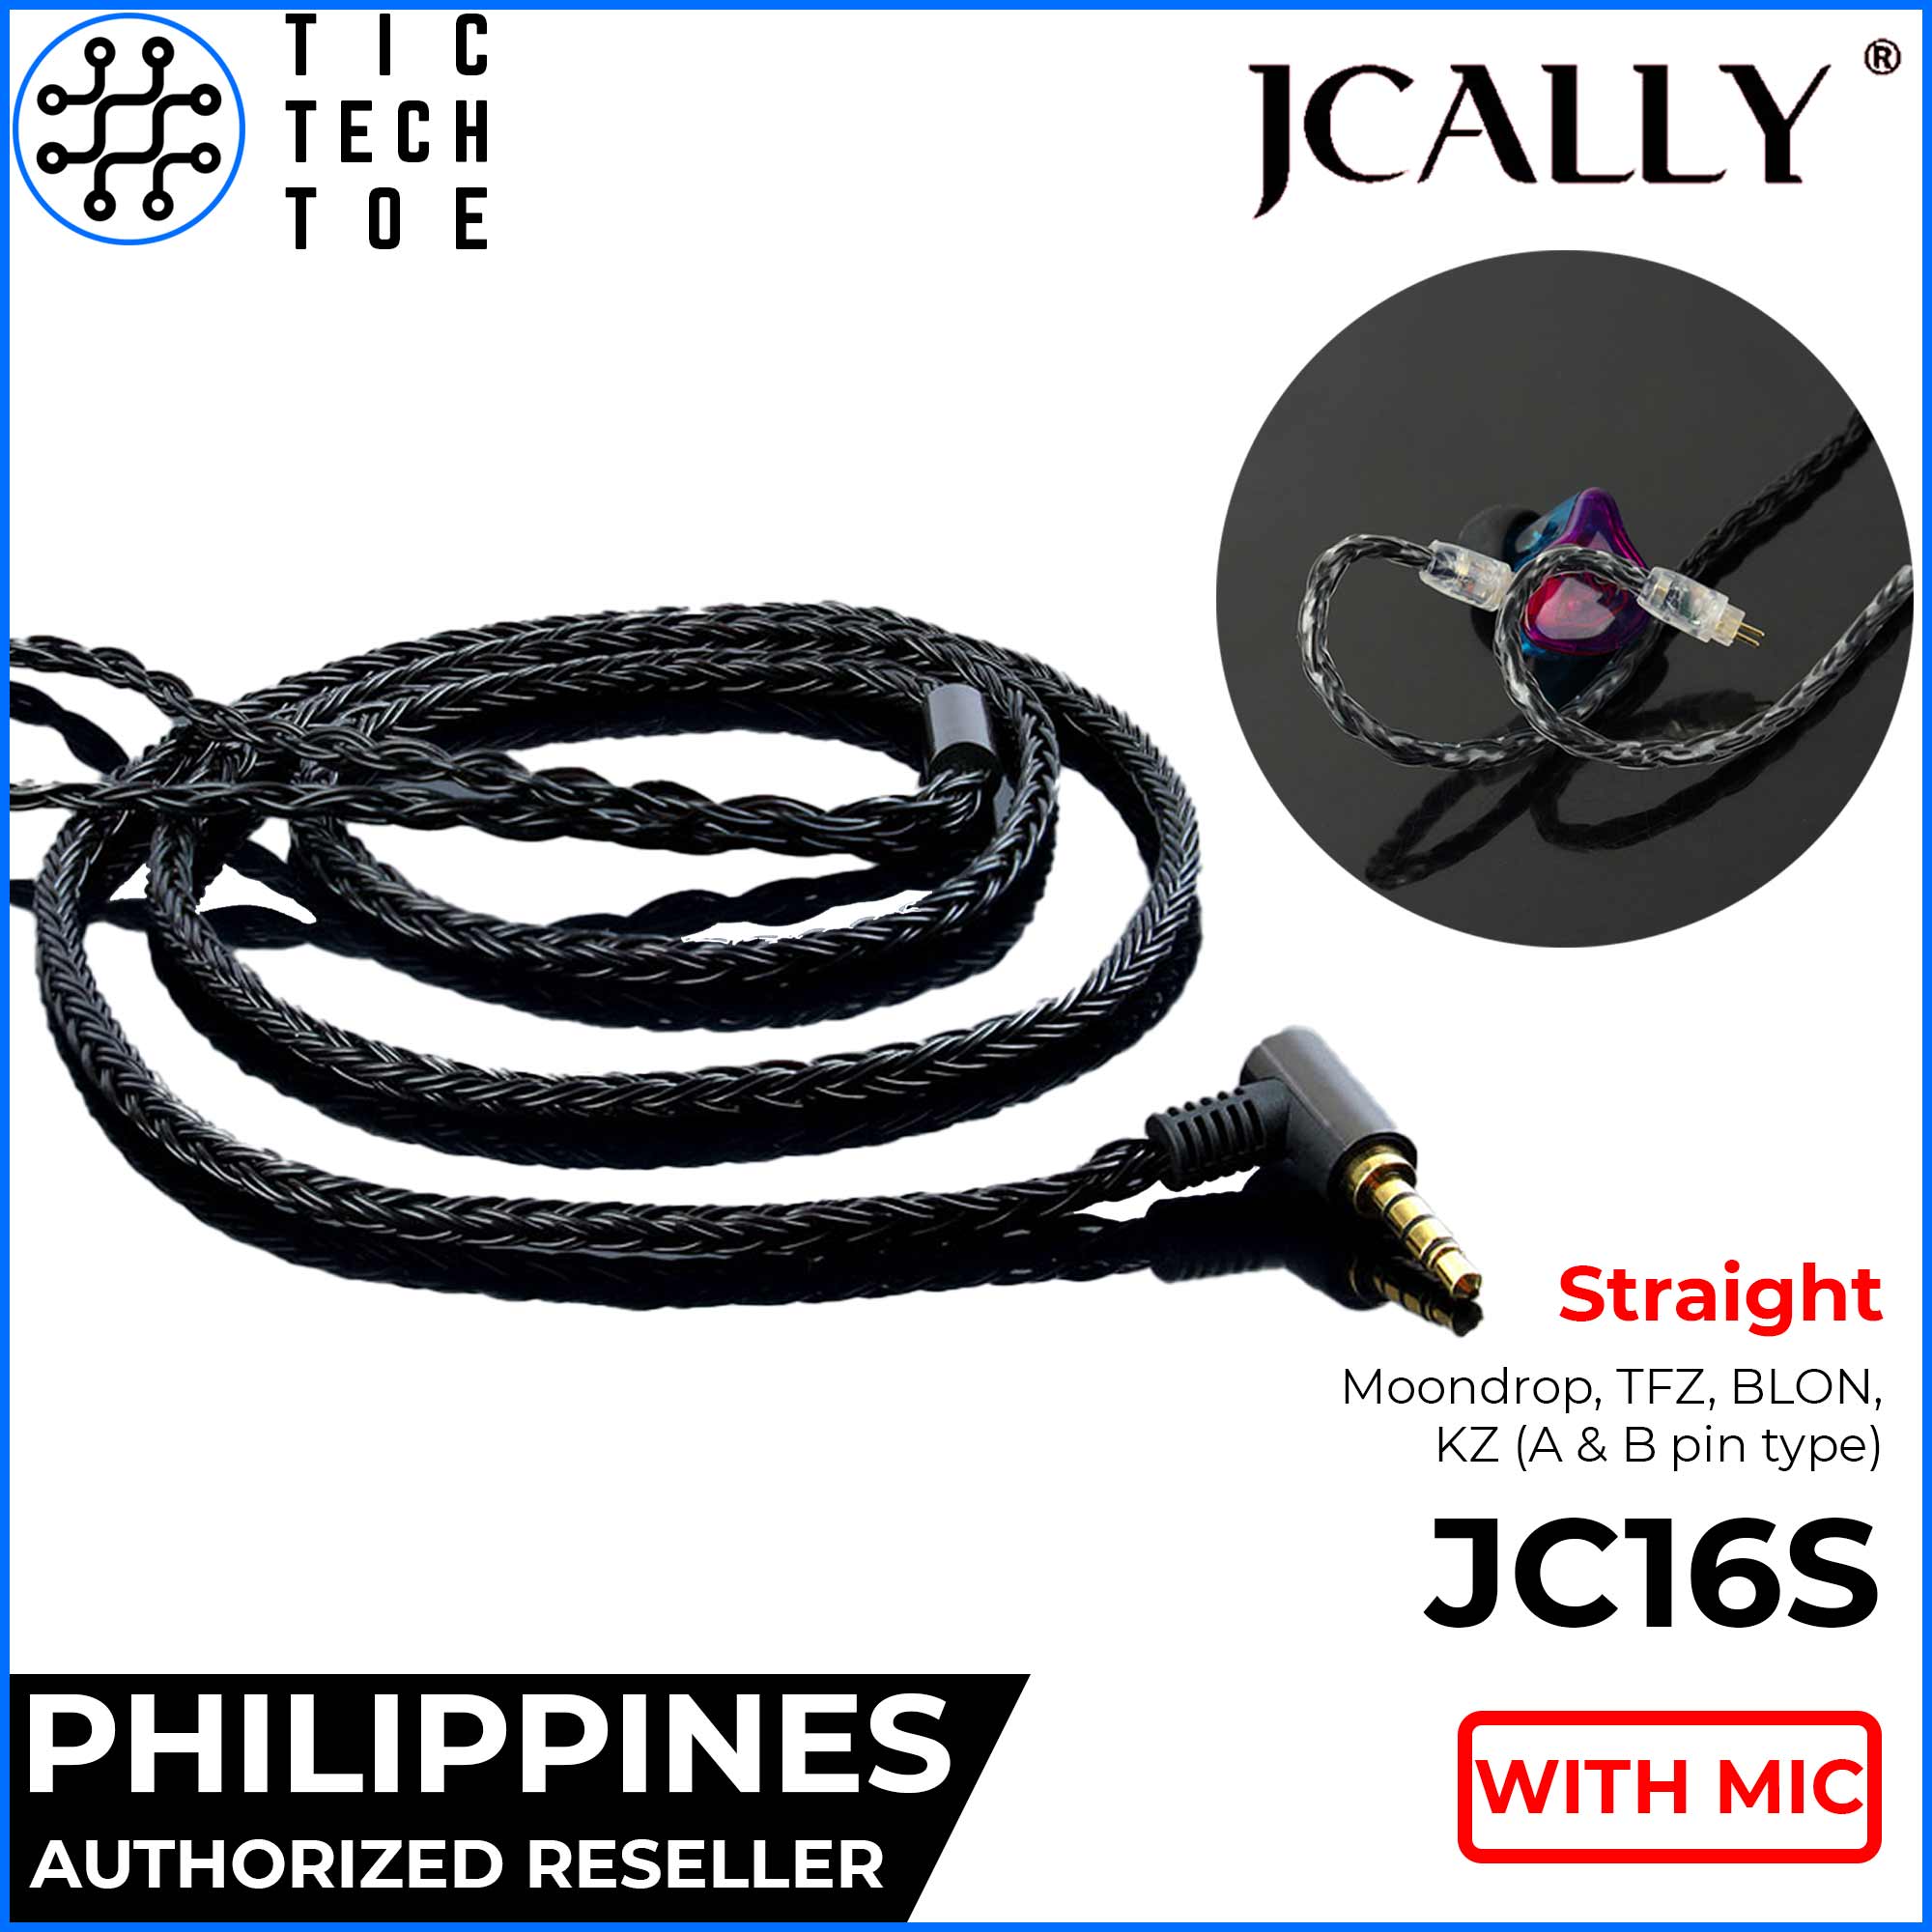 JCALLY JC16S 16-Core Braided Upgrade Cable with Mic | Lazada PH